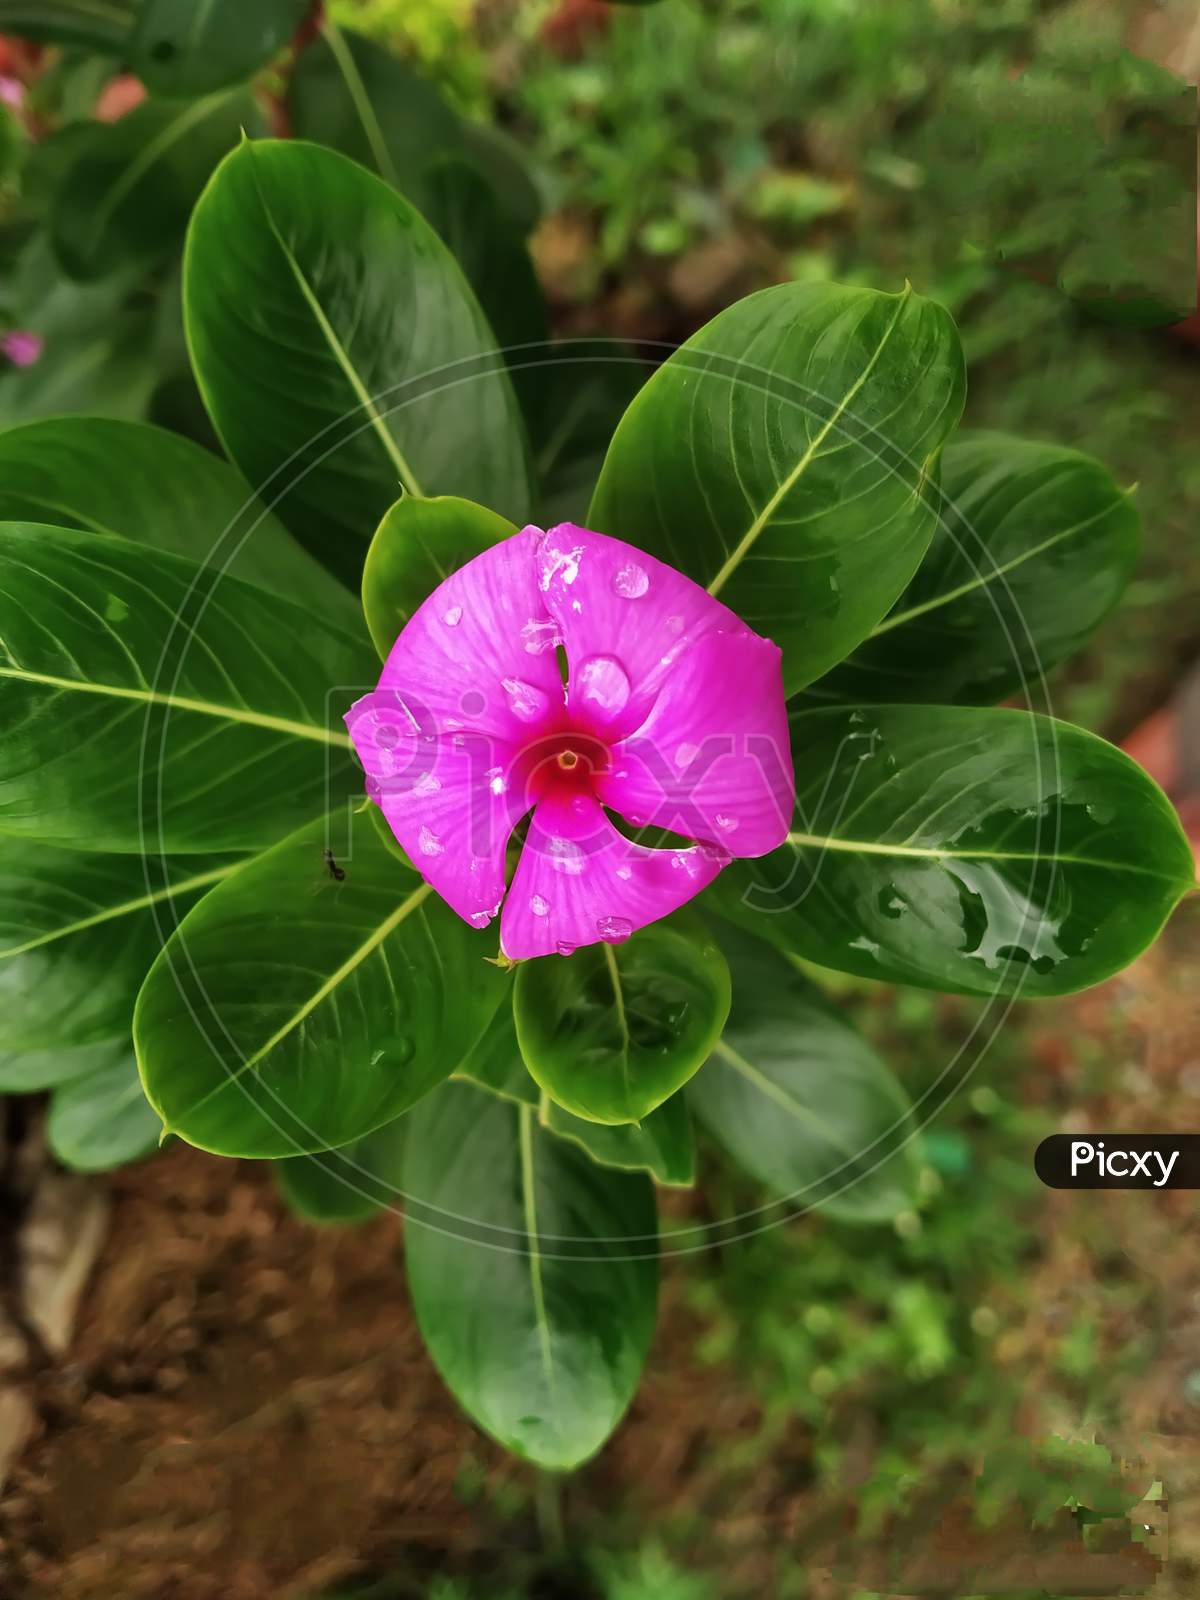 A pink Madagascar periwinkle flower